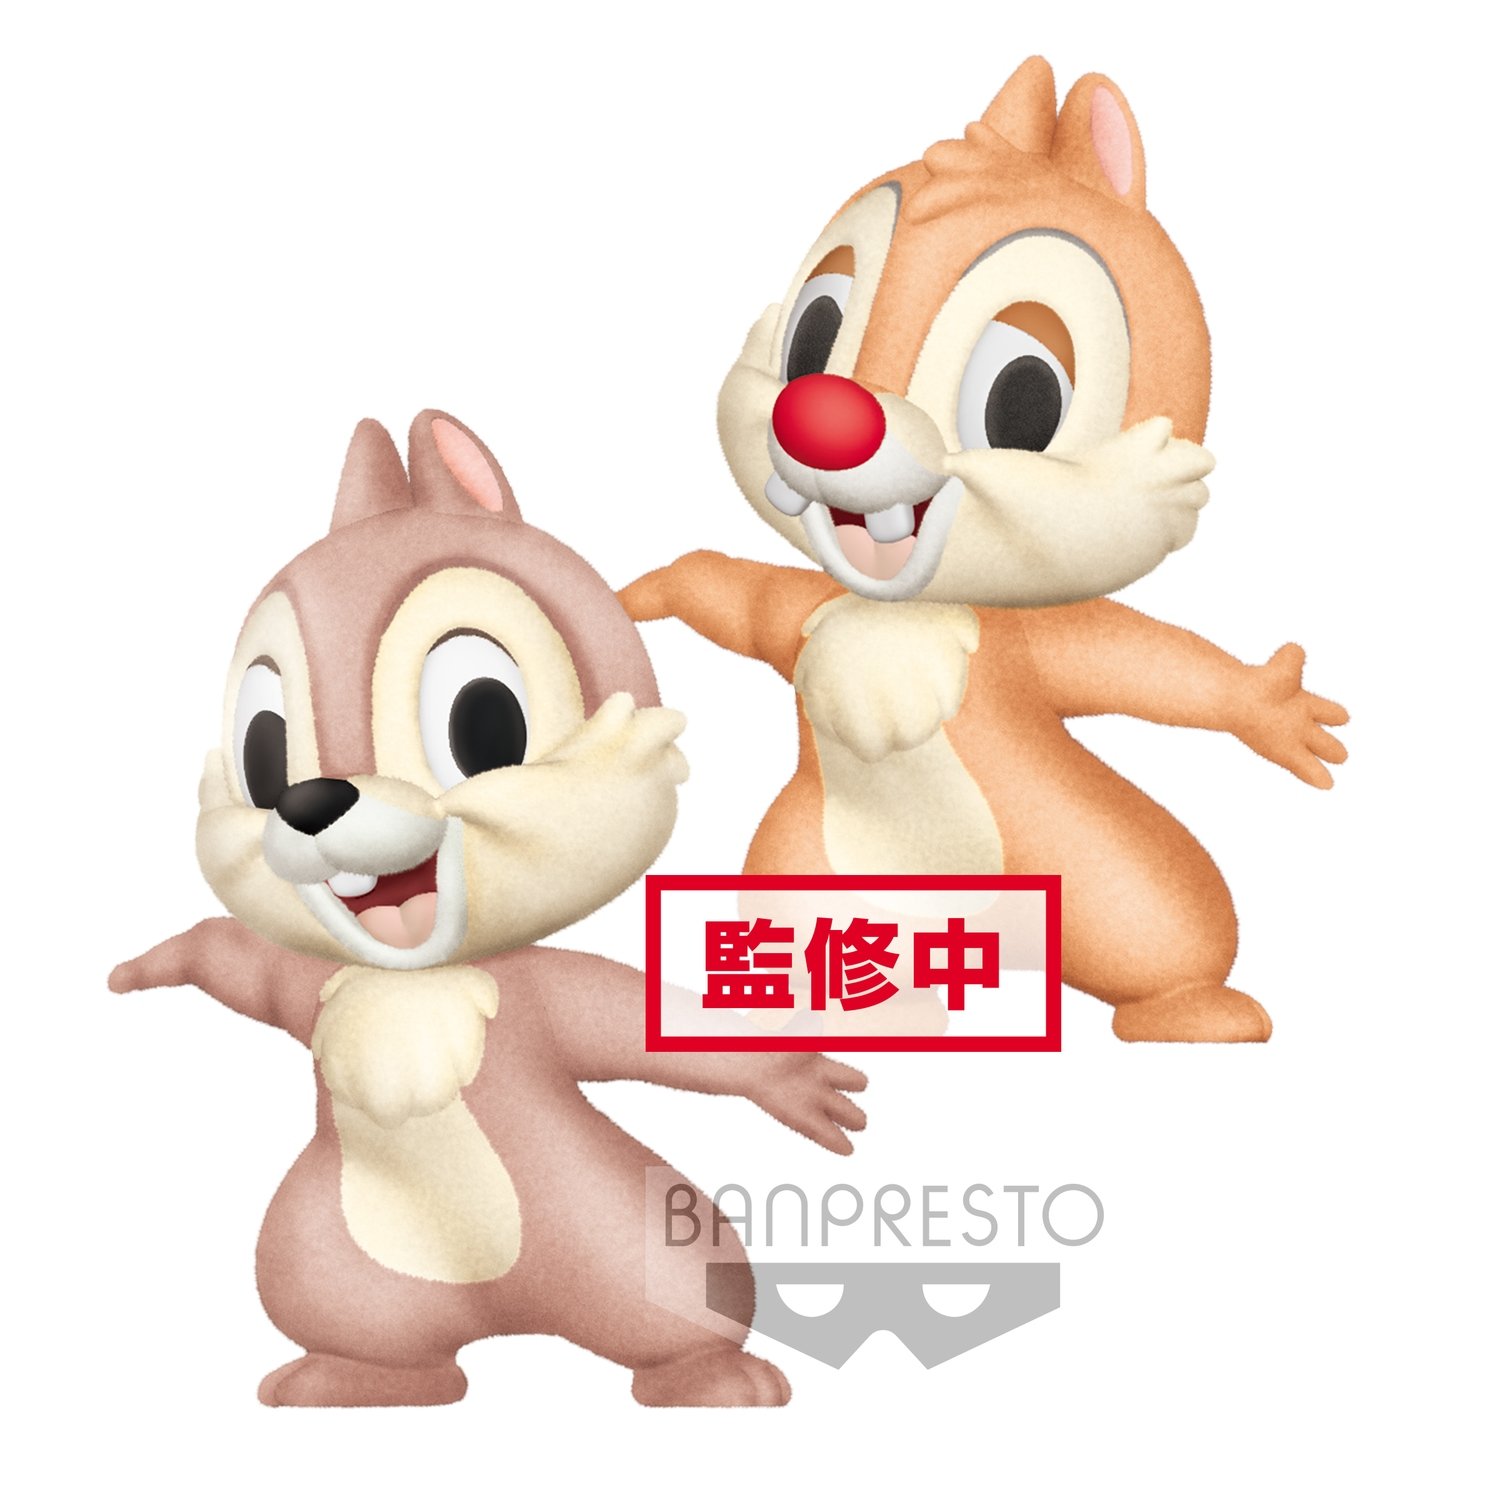 Banpresto Disney Characters Fluffy Puffy Chip and Dale